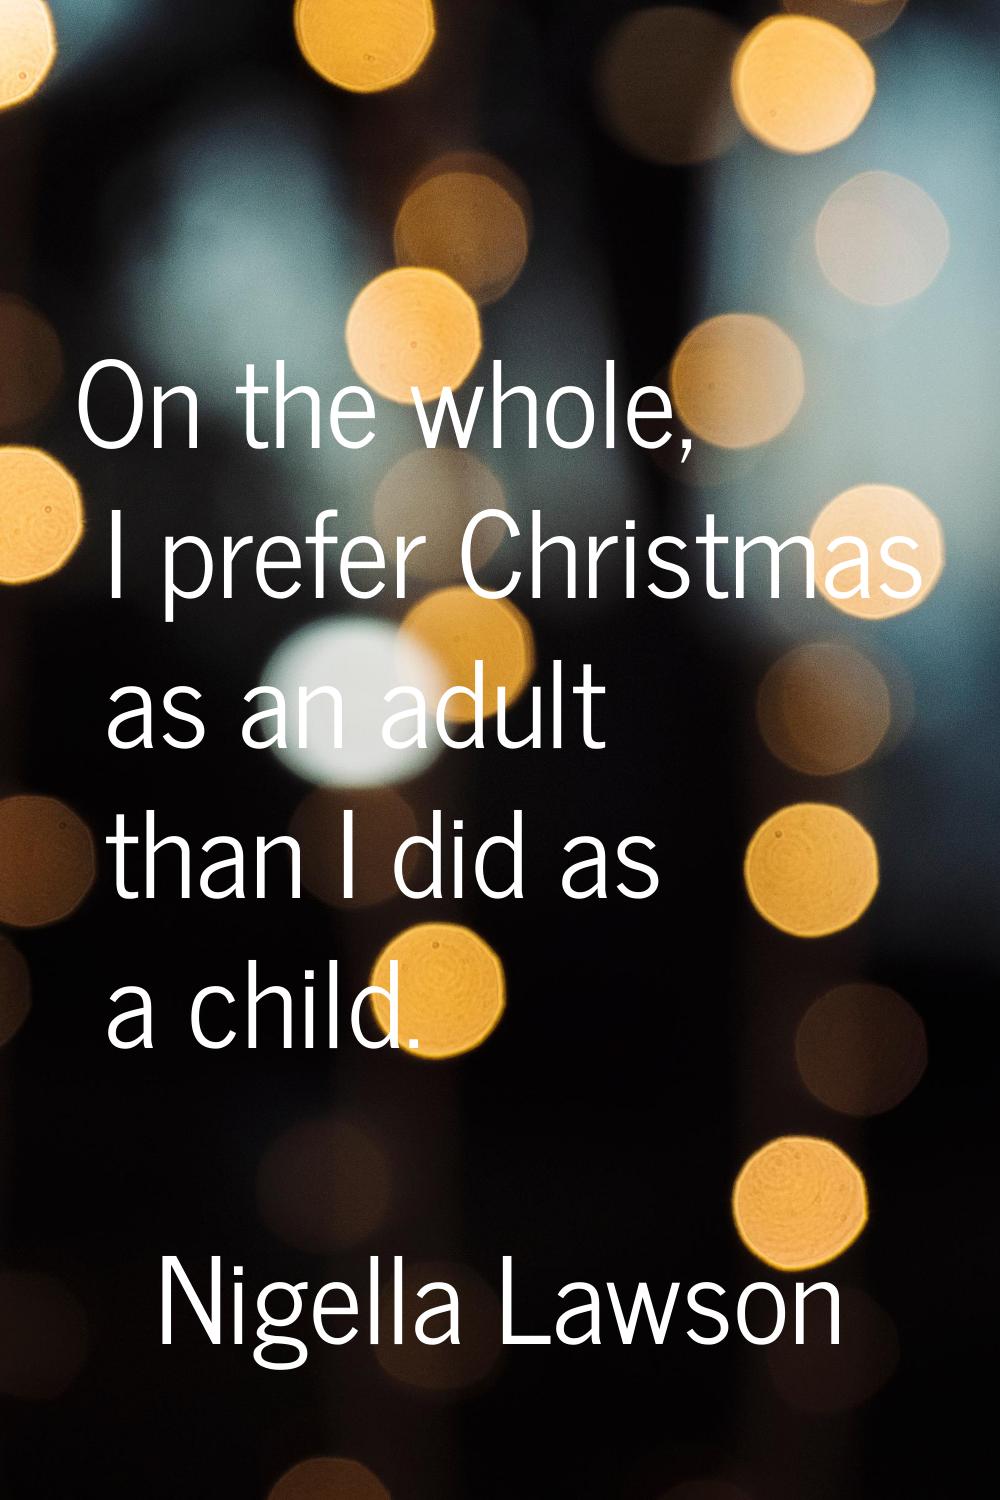 On the whole, I prefer Christmas as an adult than I did as a child.